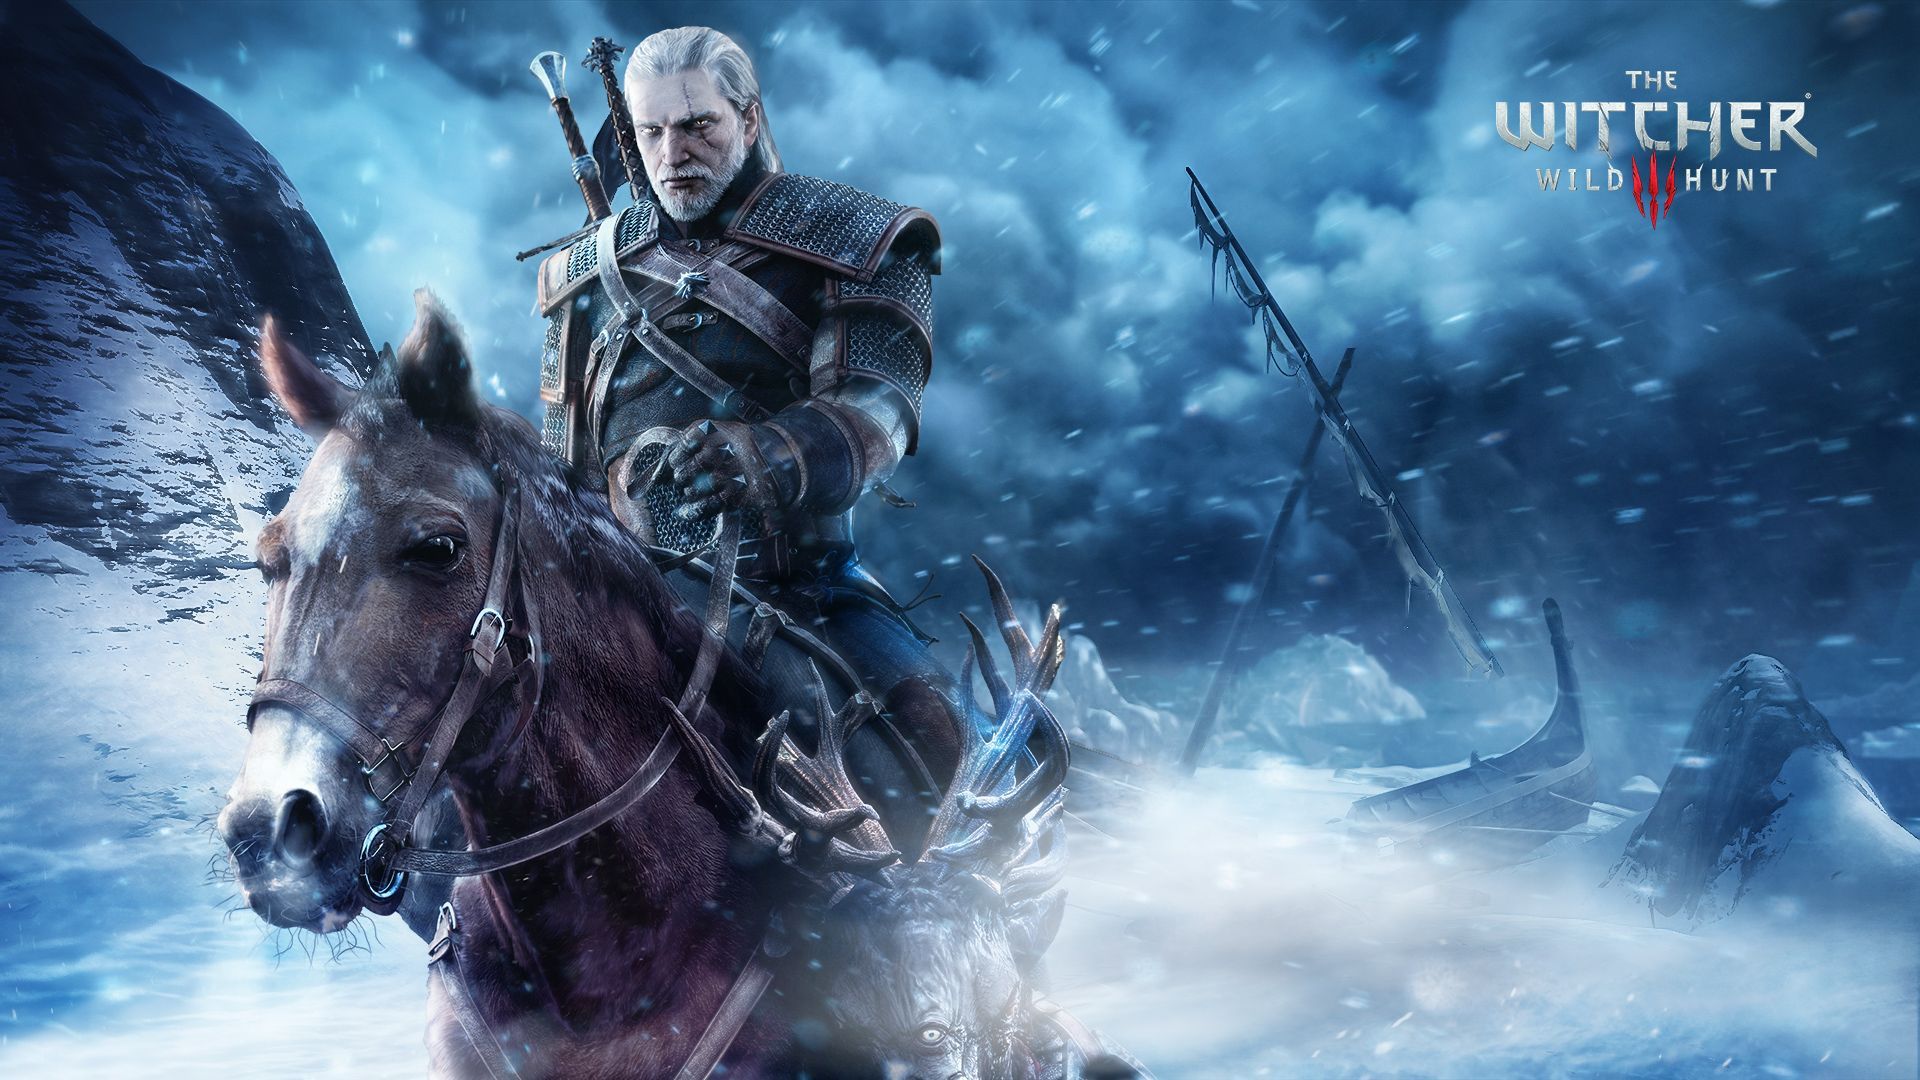 95 The Witcher 3: Wild Hunt HD Wallpapers | Backgrounds ...